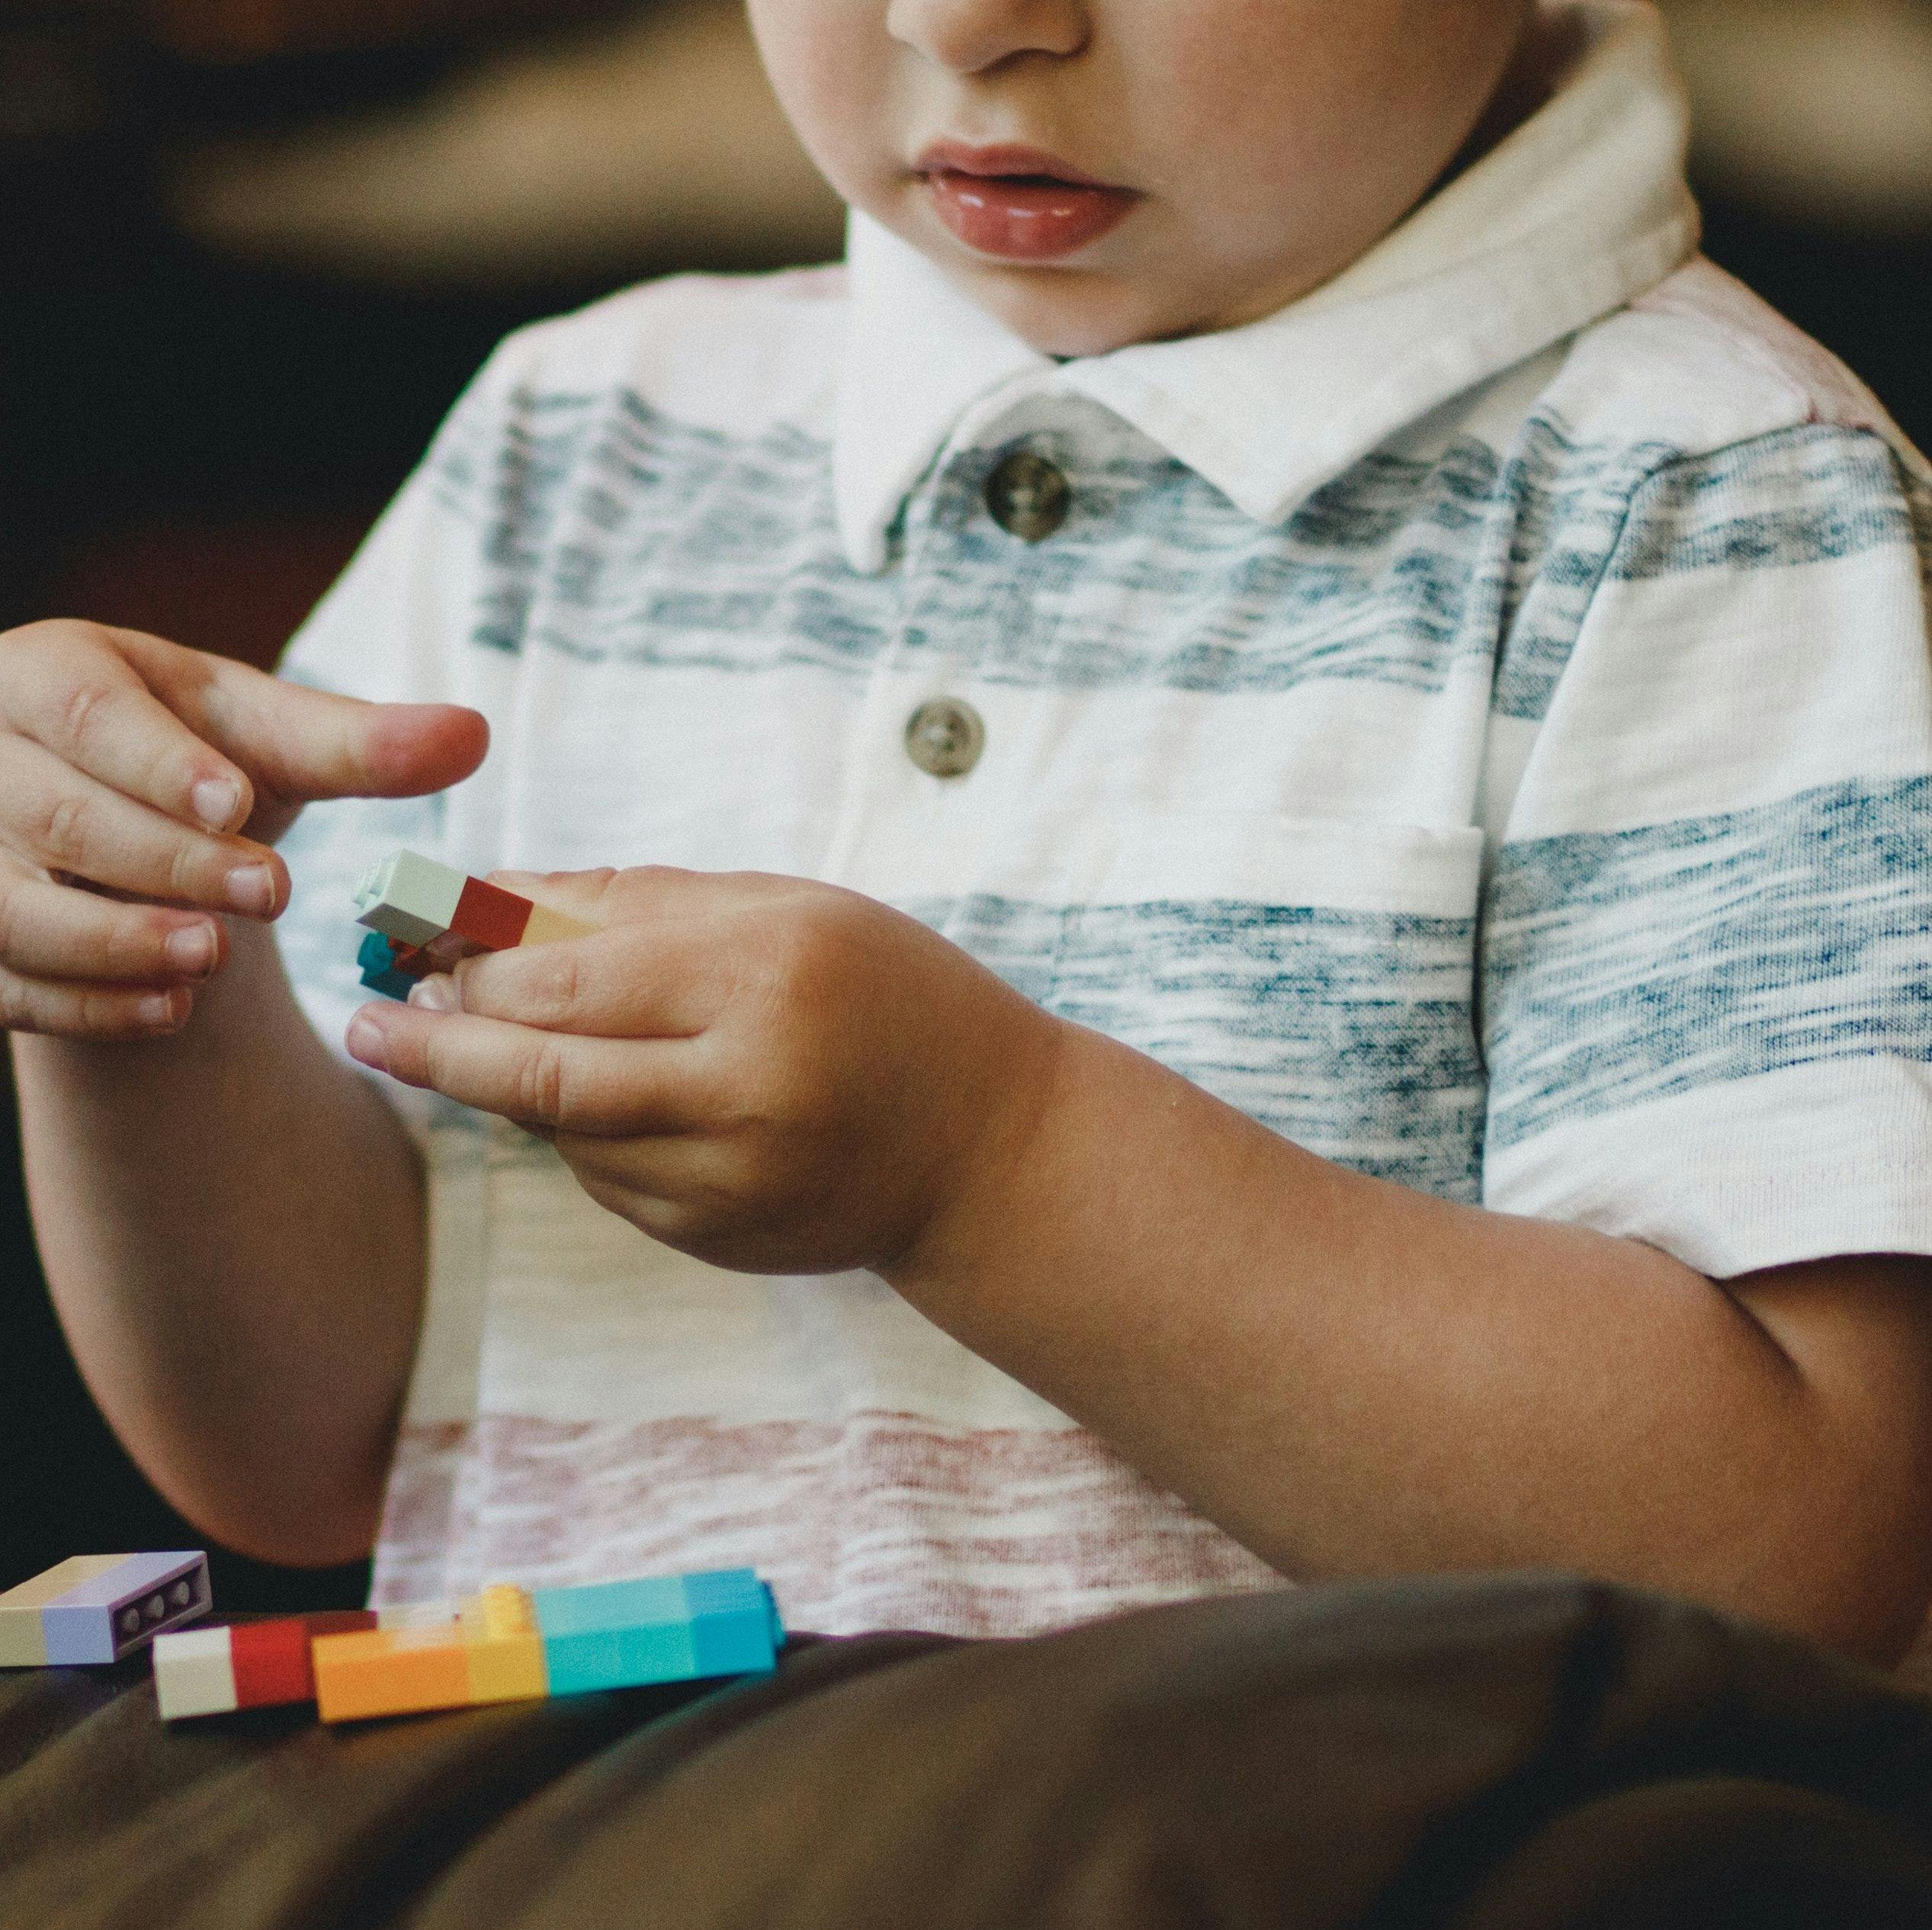 Autism Diagnosis at Toddler Age May Not Persist to Elementary School Years